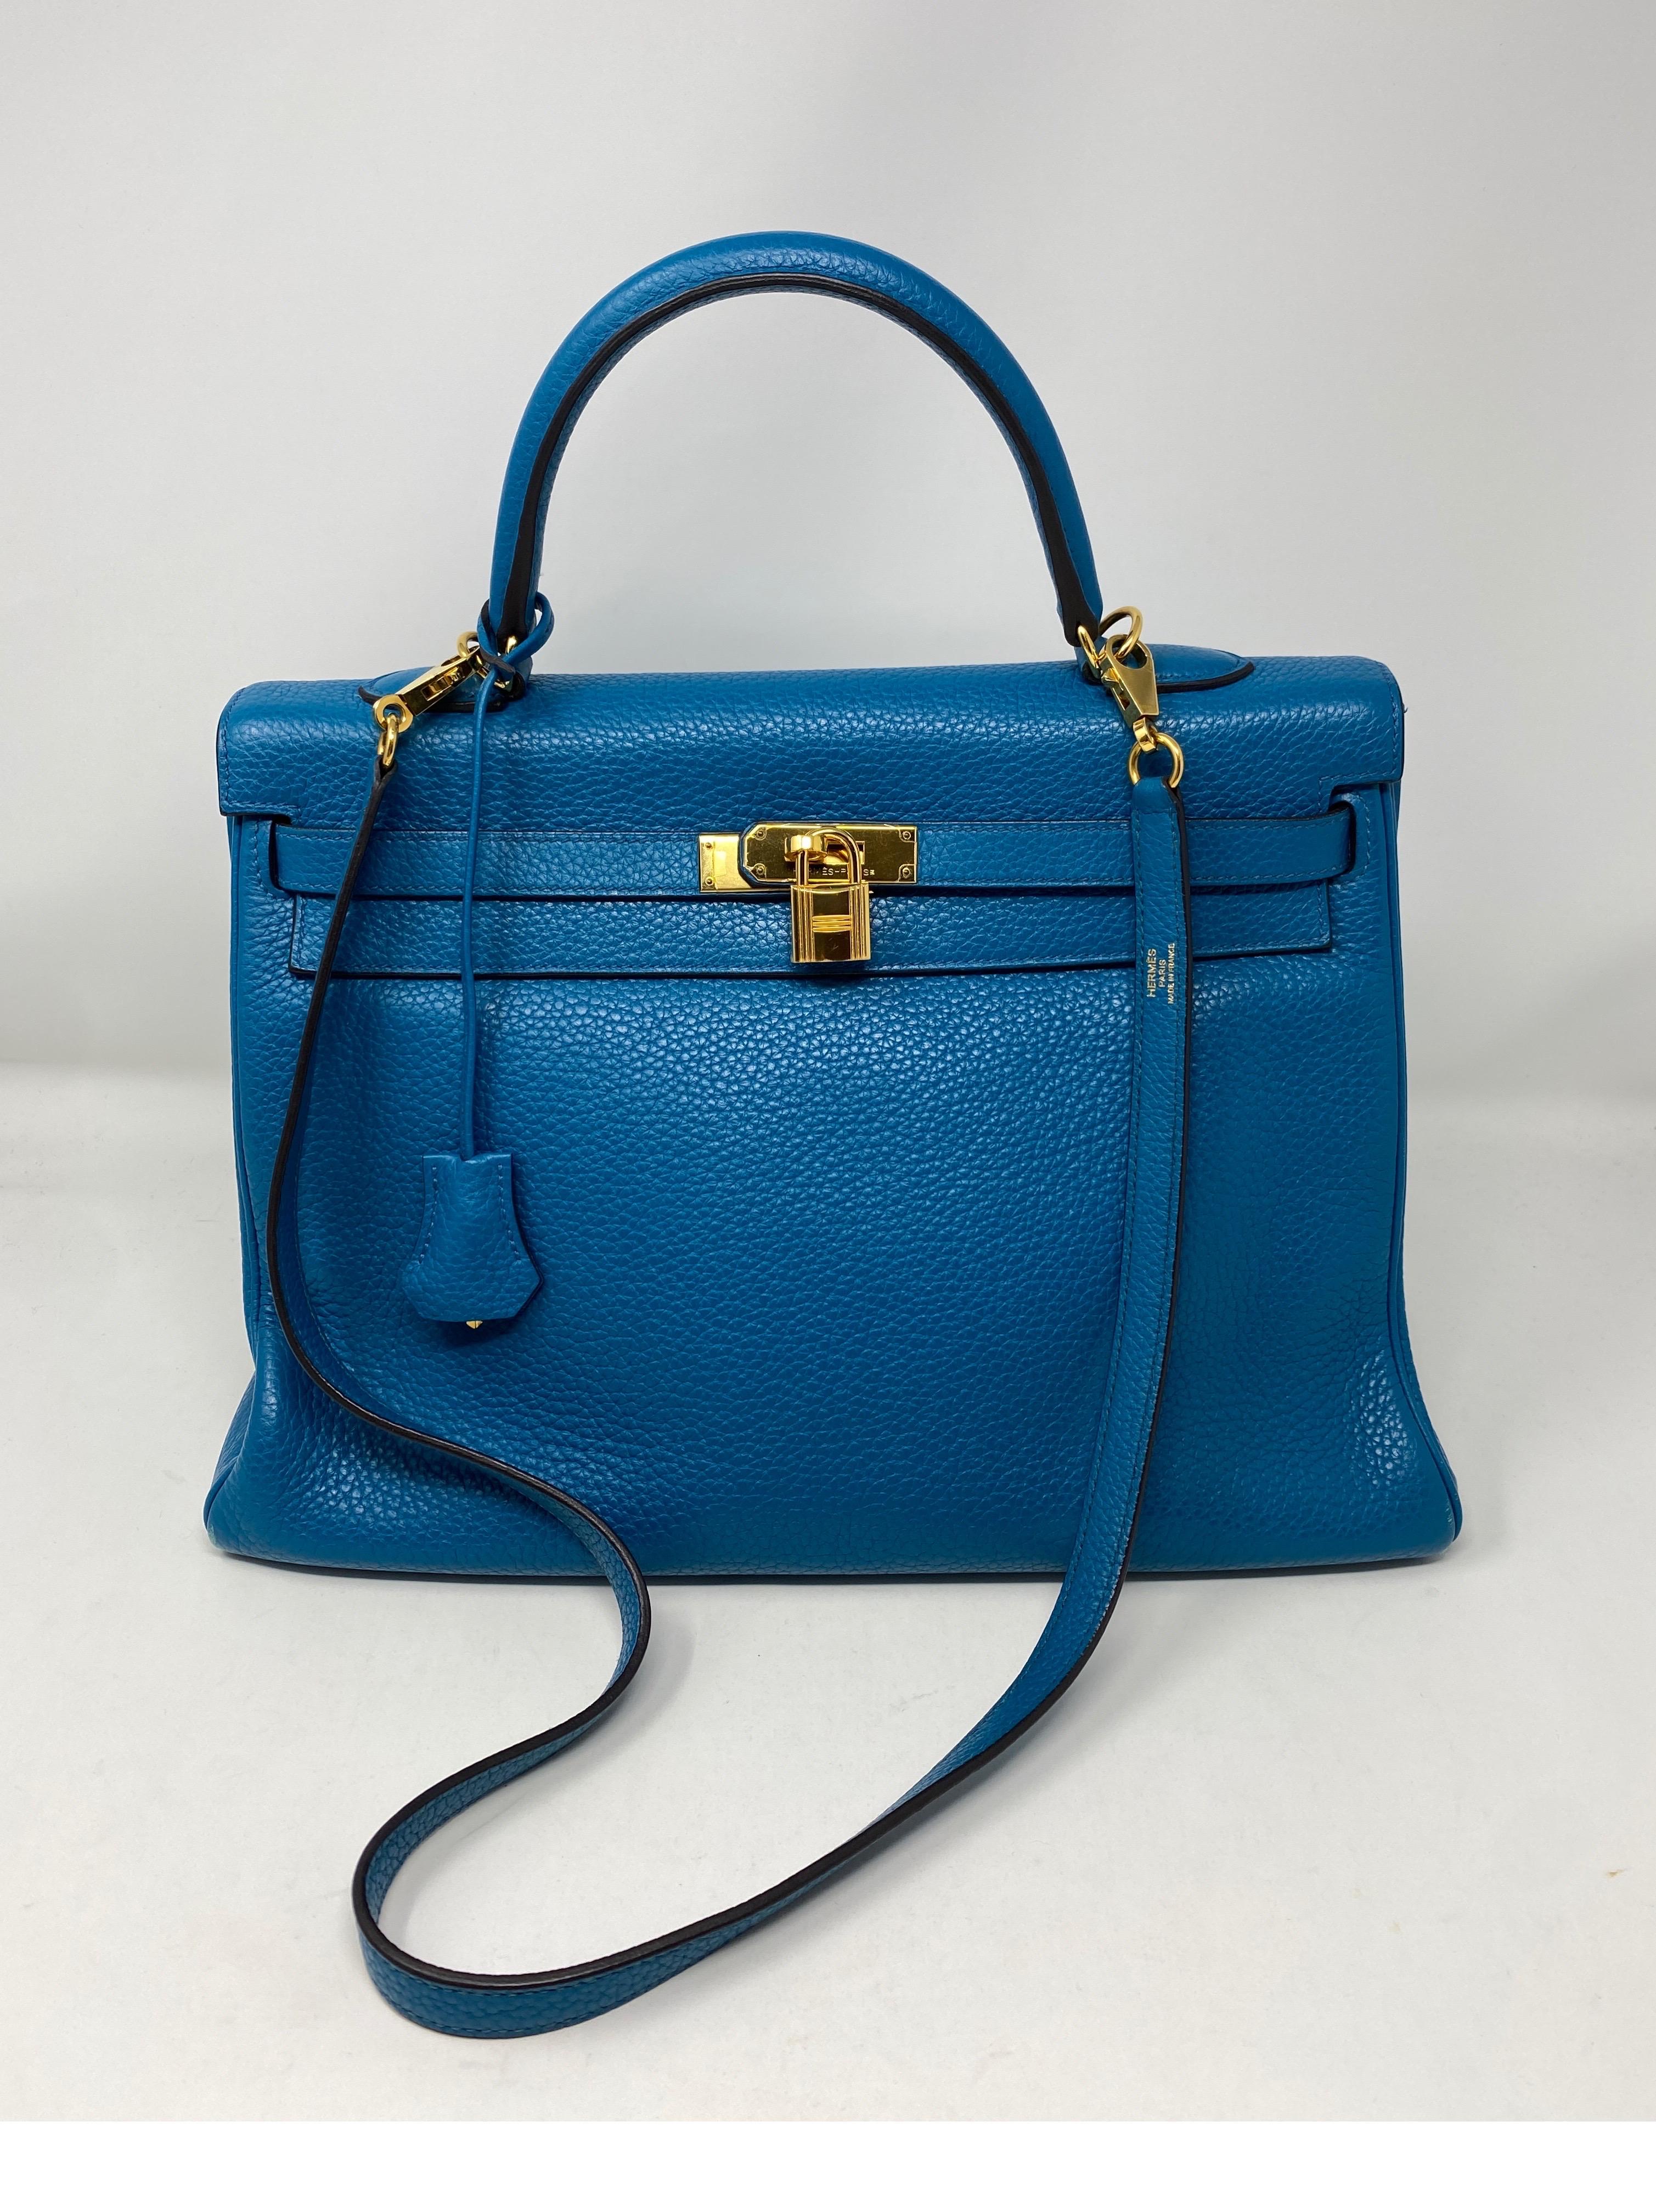 Hermes Blue Izmir Kelly 35 Bag. Gold hardware. Stunning vibrant blue color. Most wanted combo. From 2013 with original receipt. Light wear on corners. Bag is in good condition. Includes clochette, lock, keys and dust cover. Guaranteed authentic. 